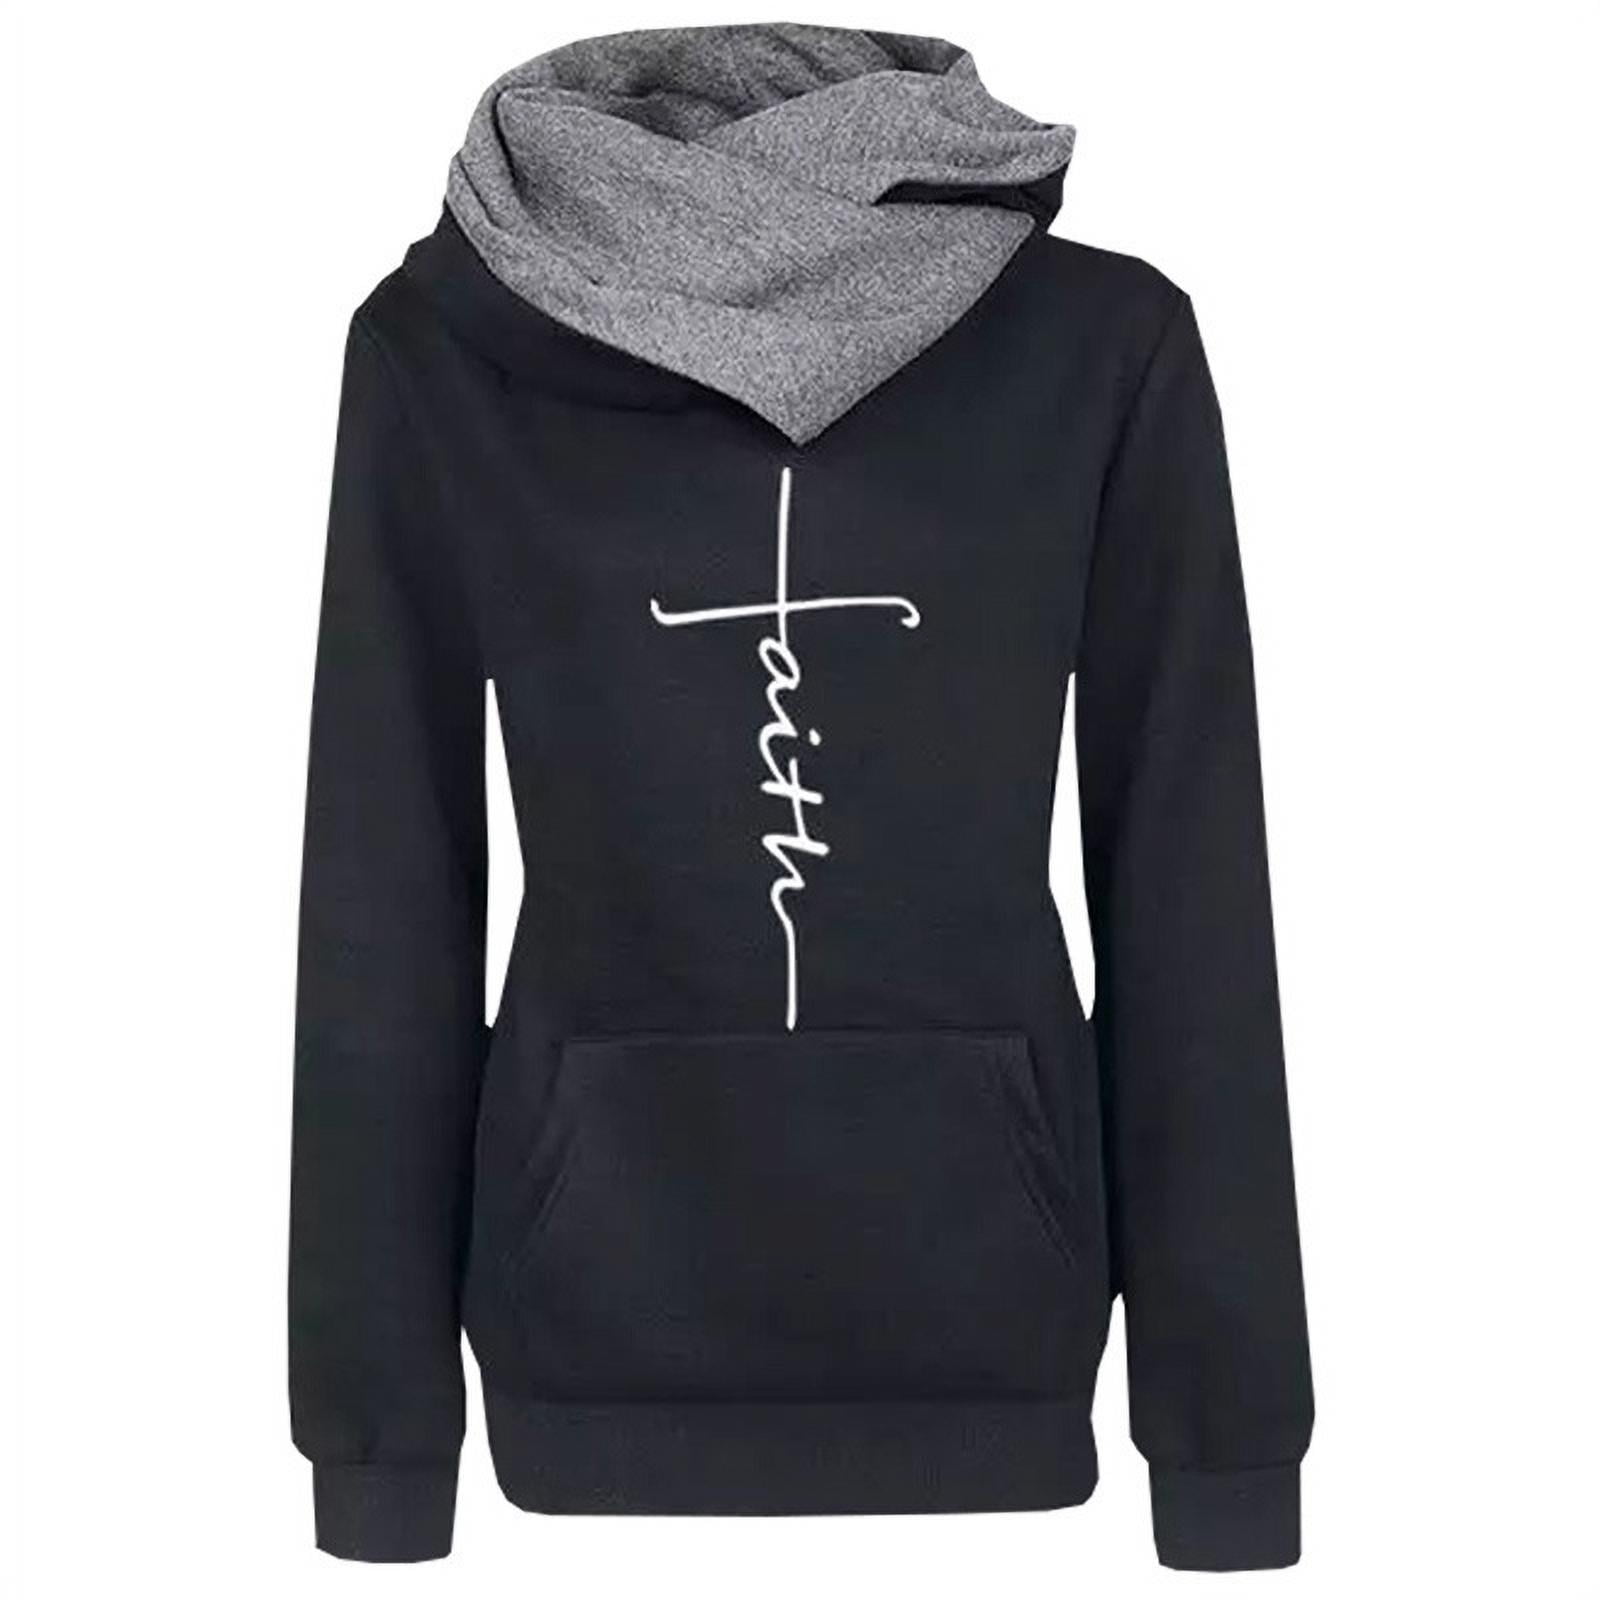 aihihe Hooded Sweatshirts Womens Casual Letter Printing Long Sleeve Tops Pullover Tracksuit Hoodie with Drawstring 